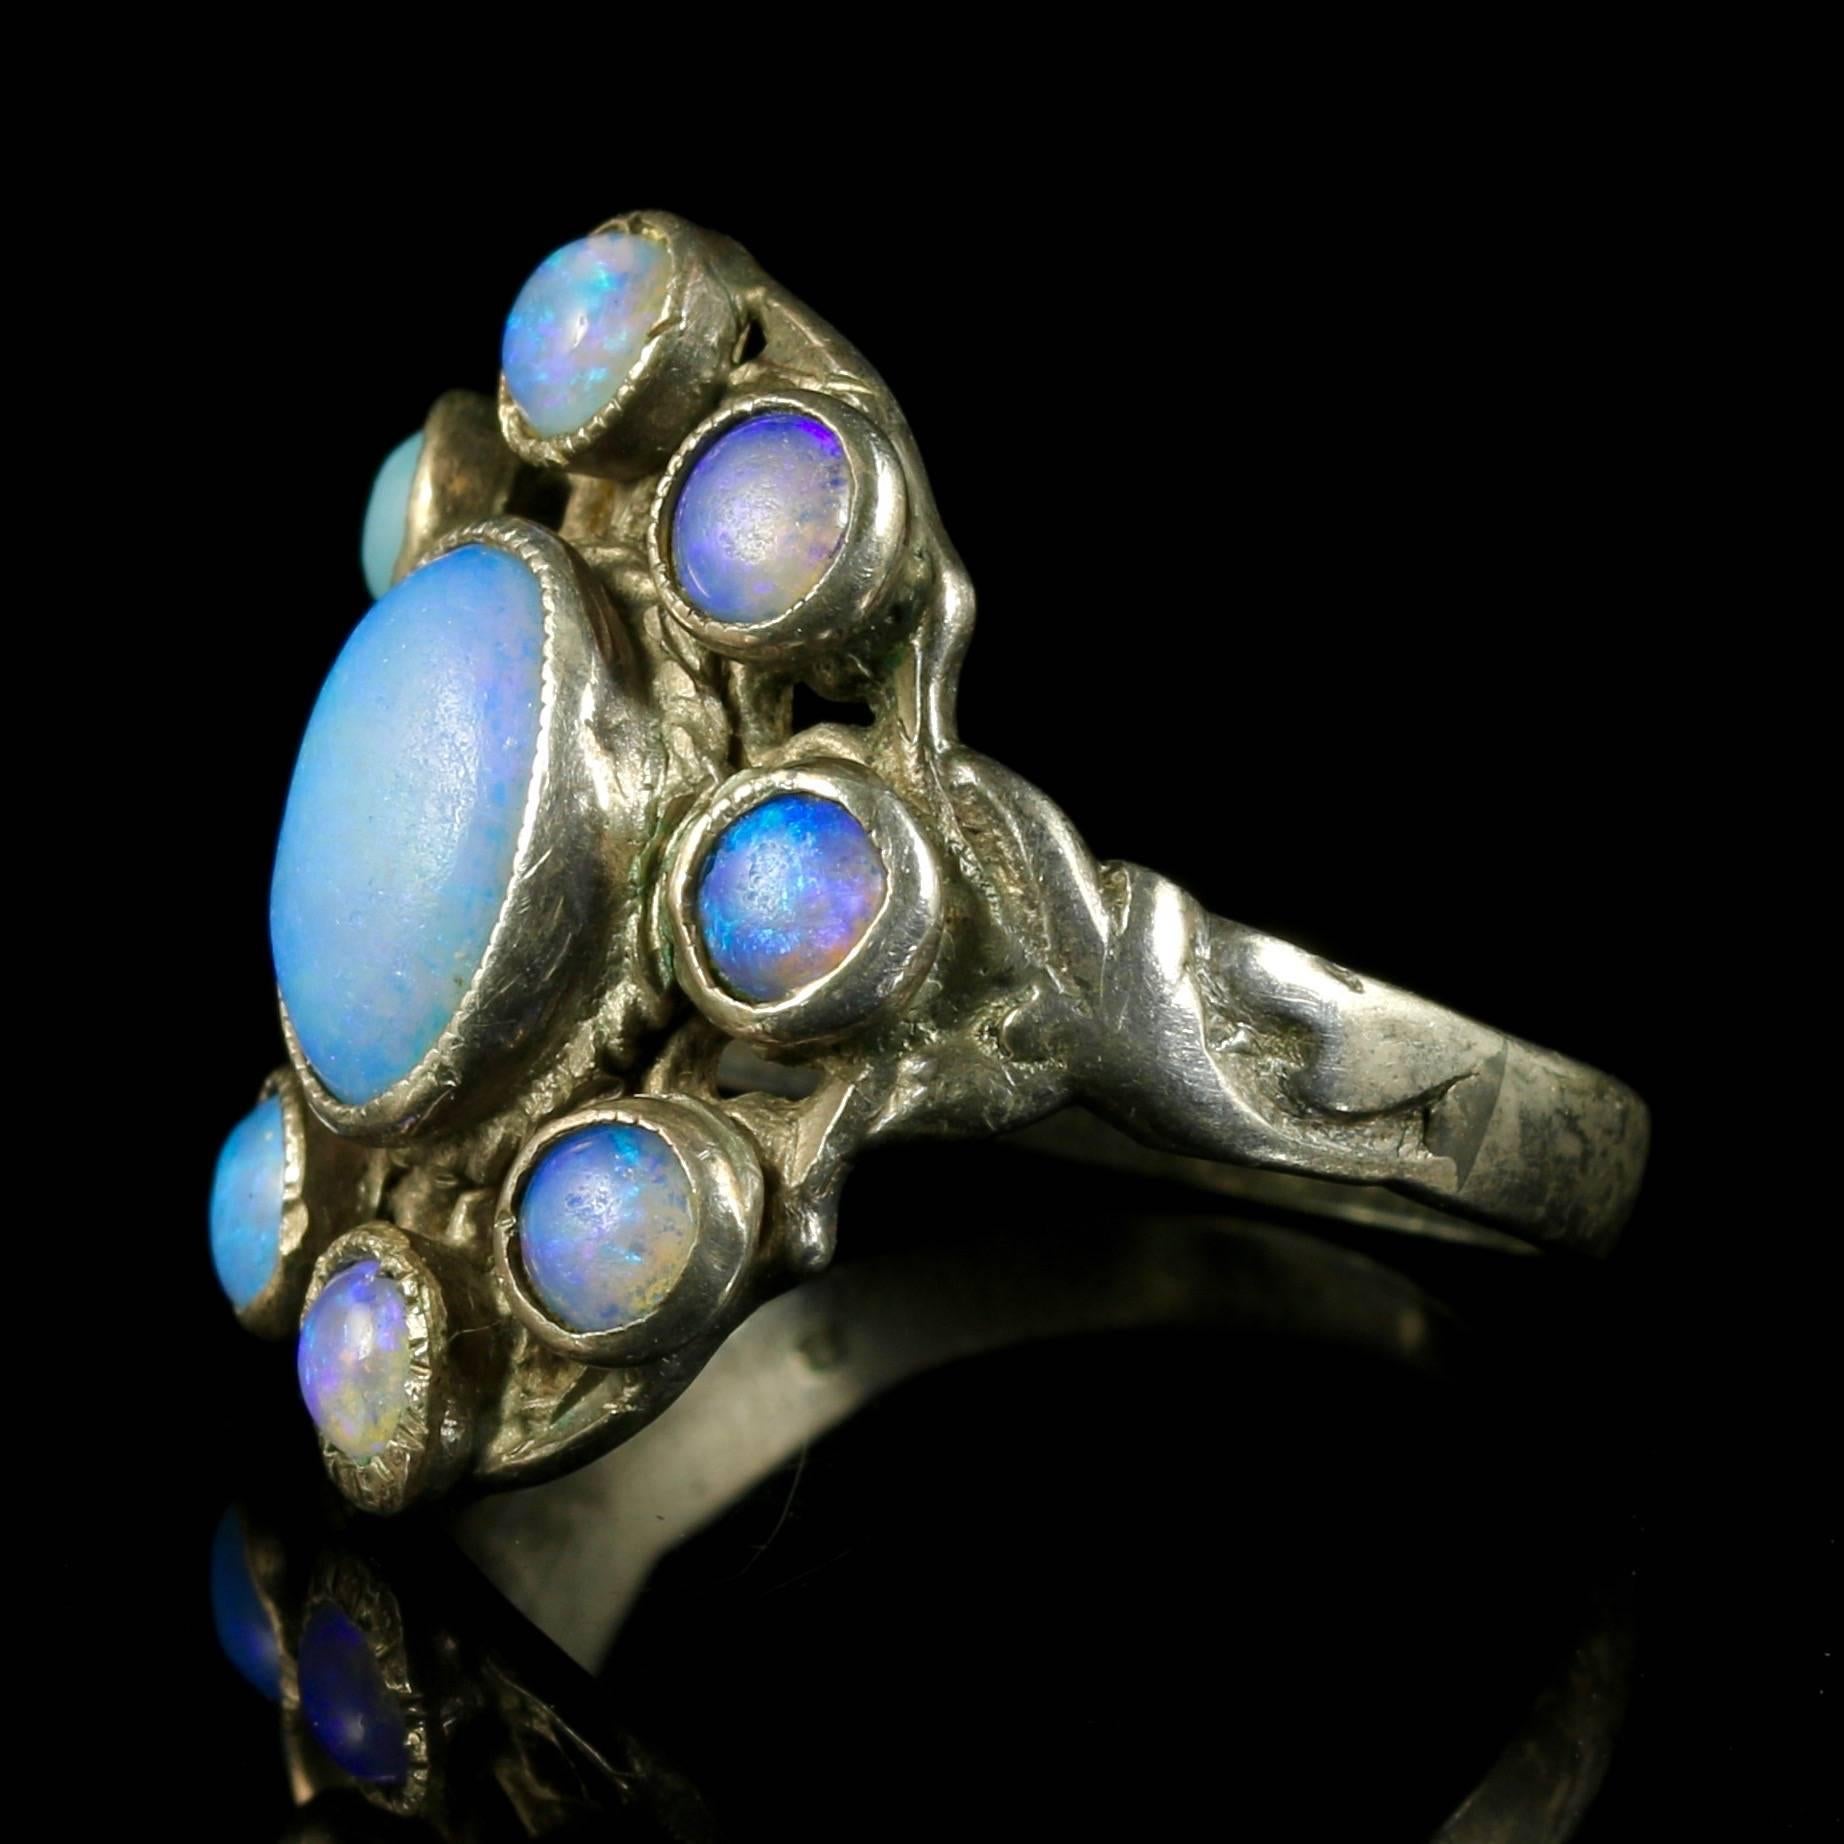 This fabulous Victorian Arts and Crafts sterling silver ring is set with lovely Natural Opals.

The Arts and Crafts Movement began in Britain around 1880 and quickly spread to America, Europe and Japan. 

Inspired by the ideas of John Ruskin and